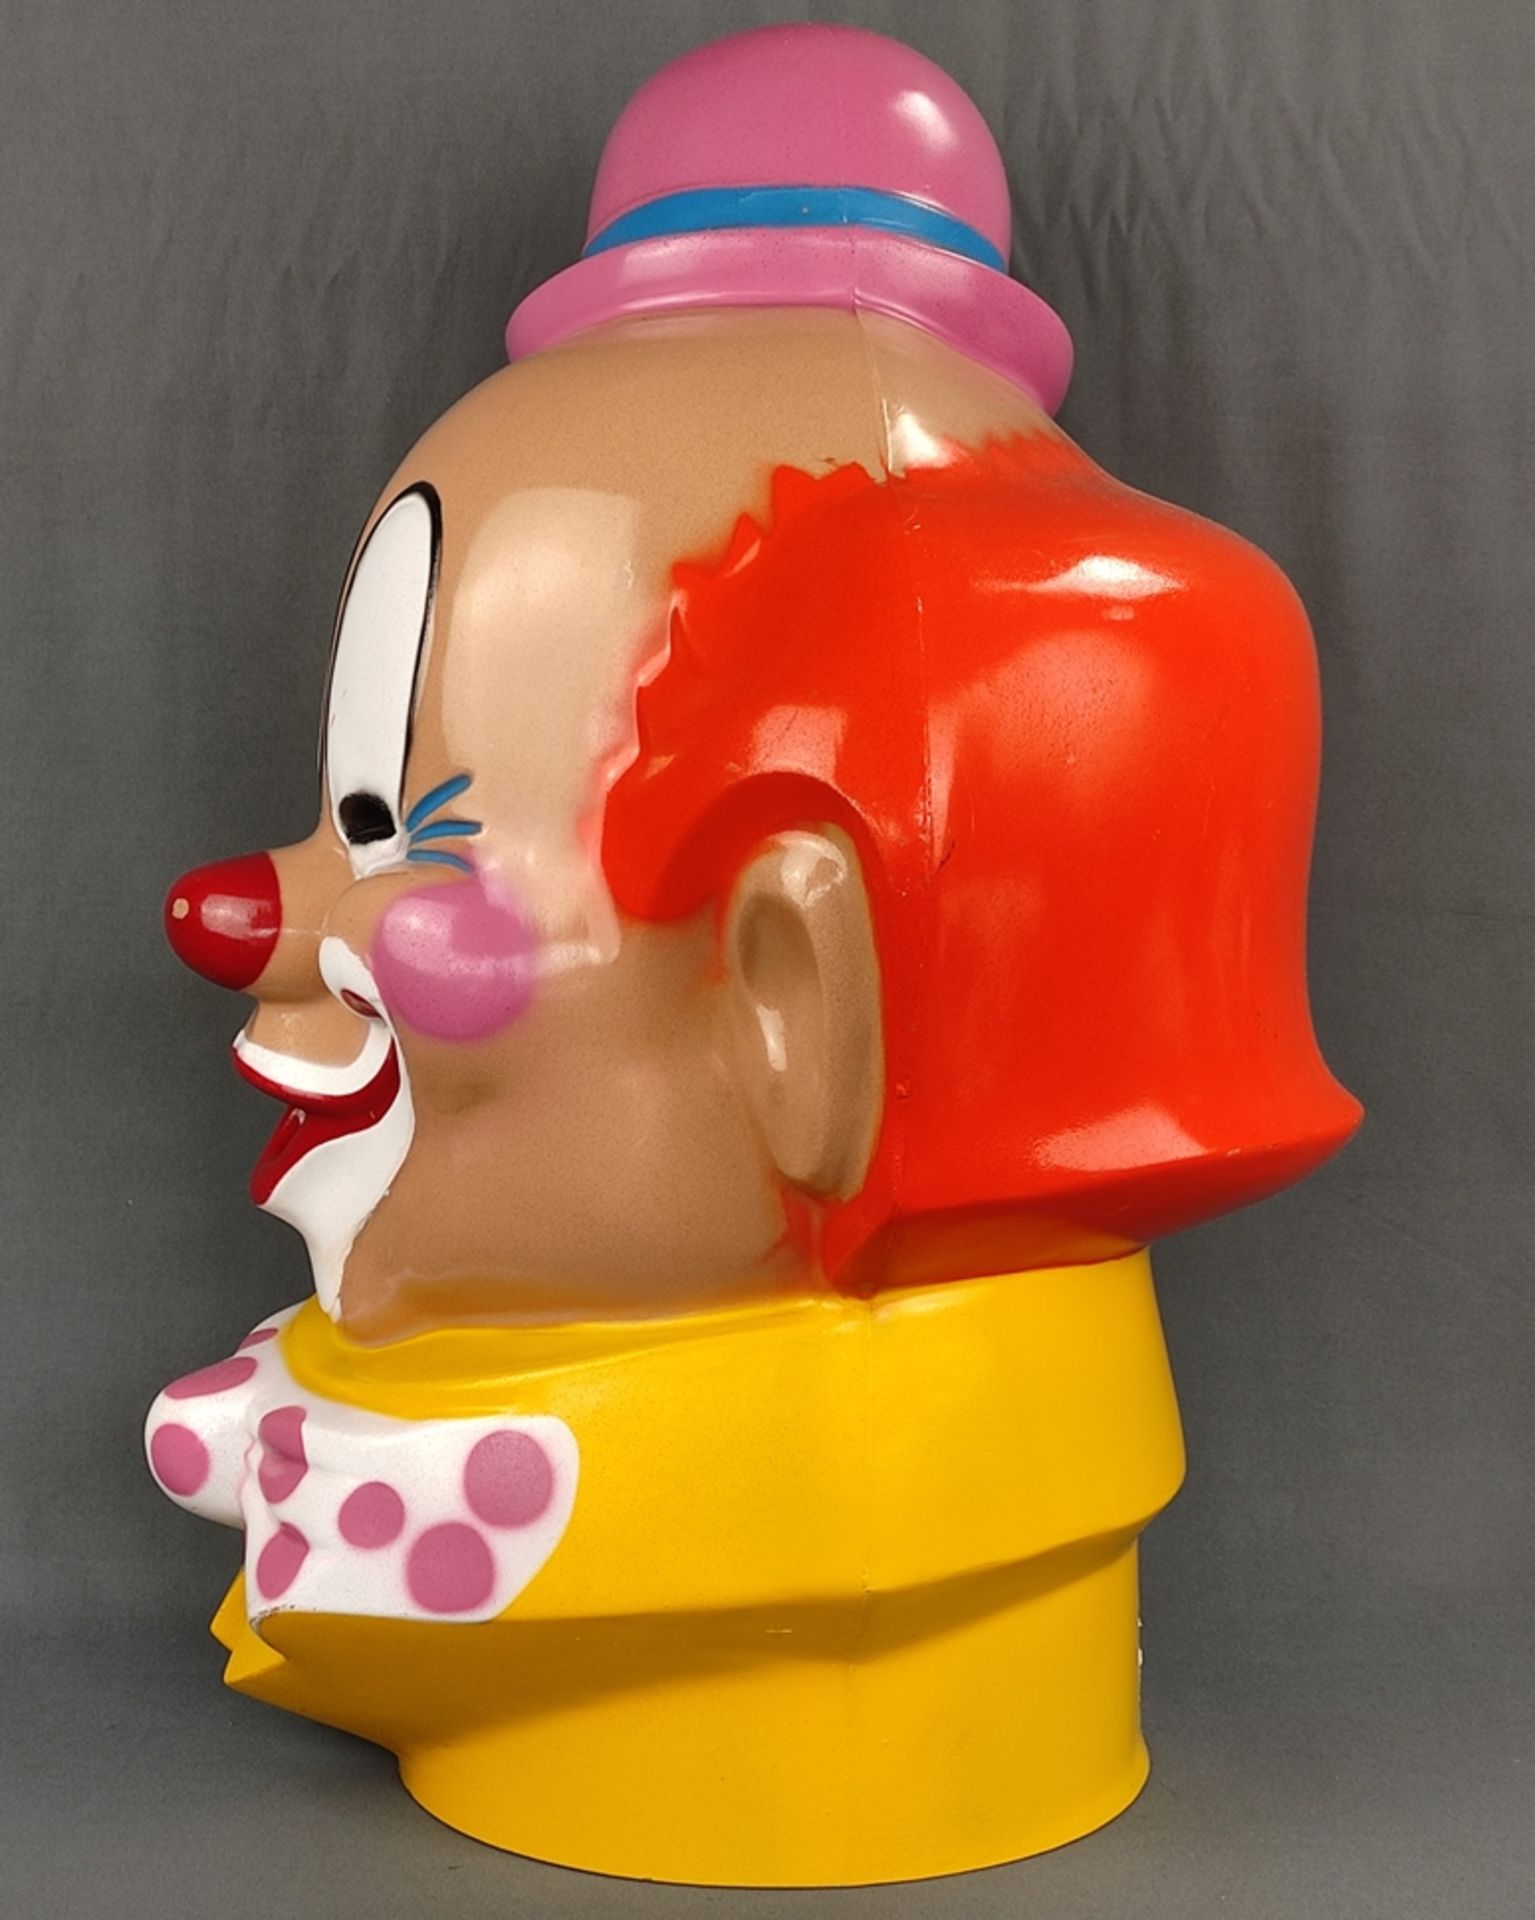 Clown head as balloon inflator, balloon inflator, 1974, Beverly Hills Calif, polychrome, plastic, h - Image 2 of 7